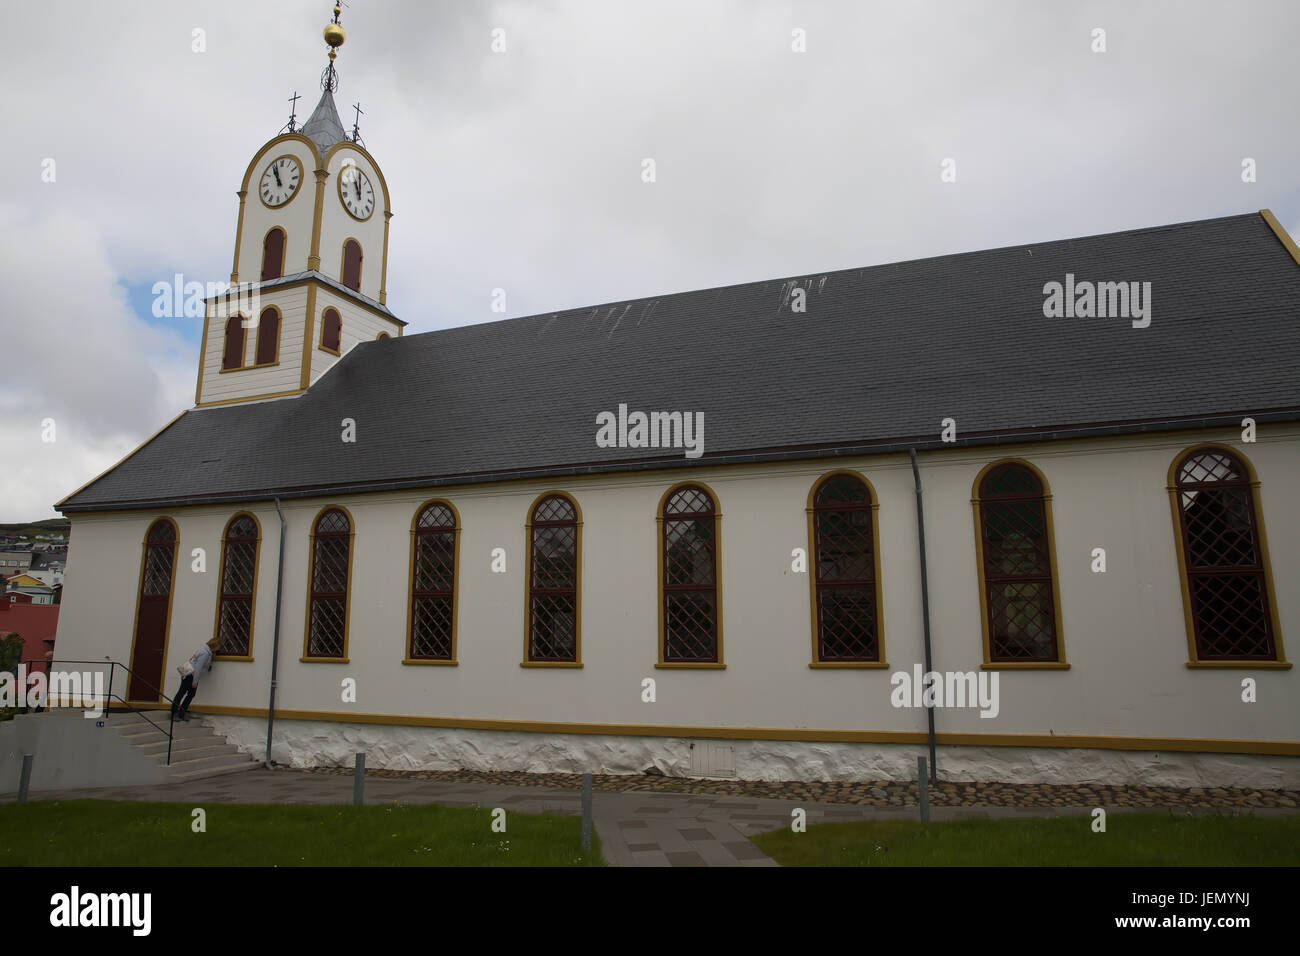 Thorshavn cathedral in the Faroe Islands. The Cruise Ship, Azura, makes its maiden visit to The Faroe Islands. It's the largest cruise ship to visit the port . Stock Photo